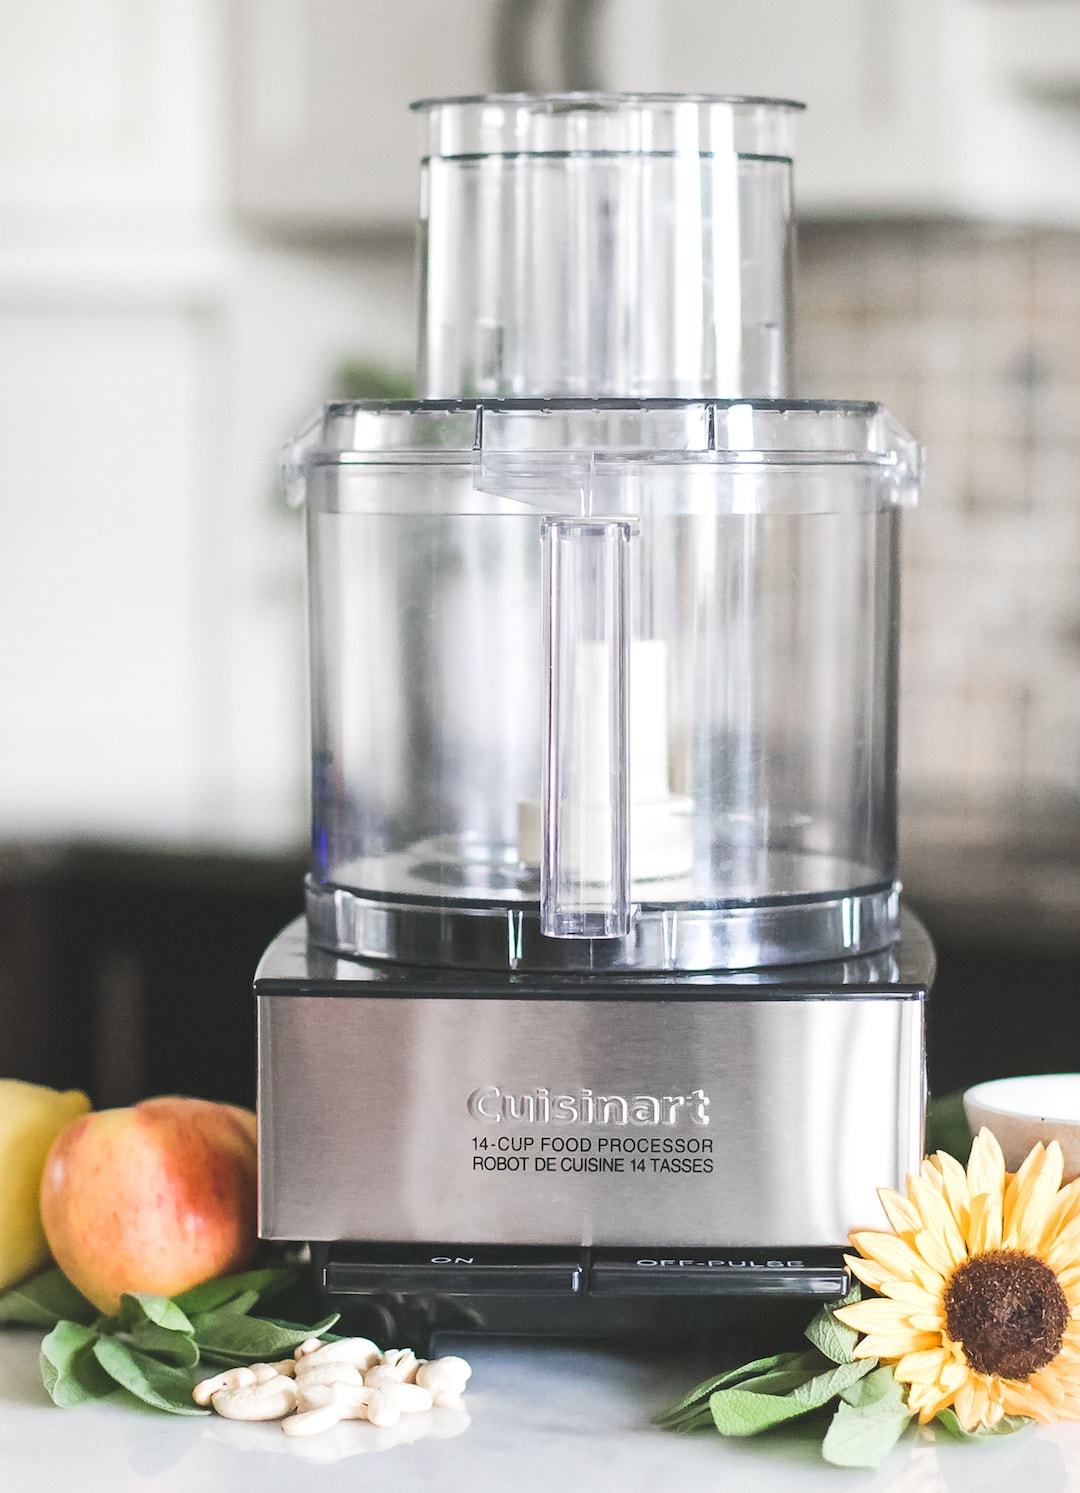 Christmas Gift Guide For the Kitchen - Cuisinart Food Processor